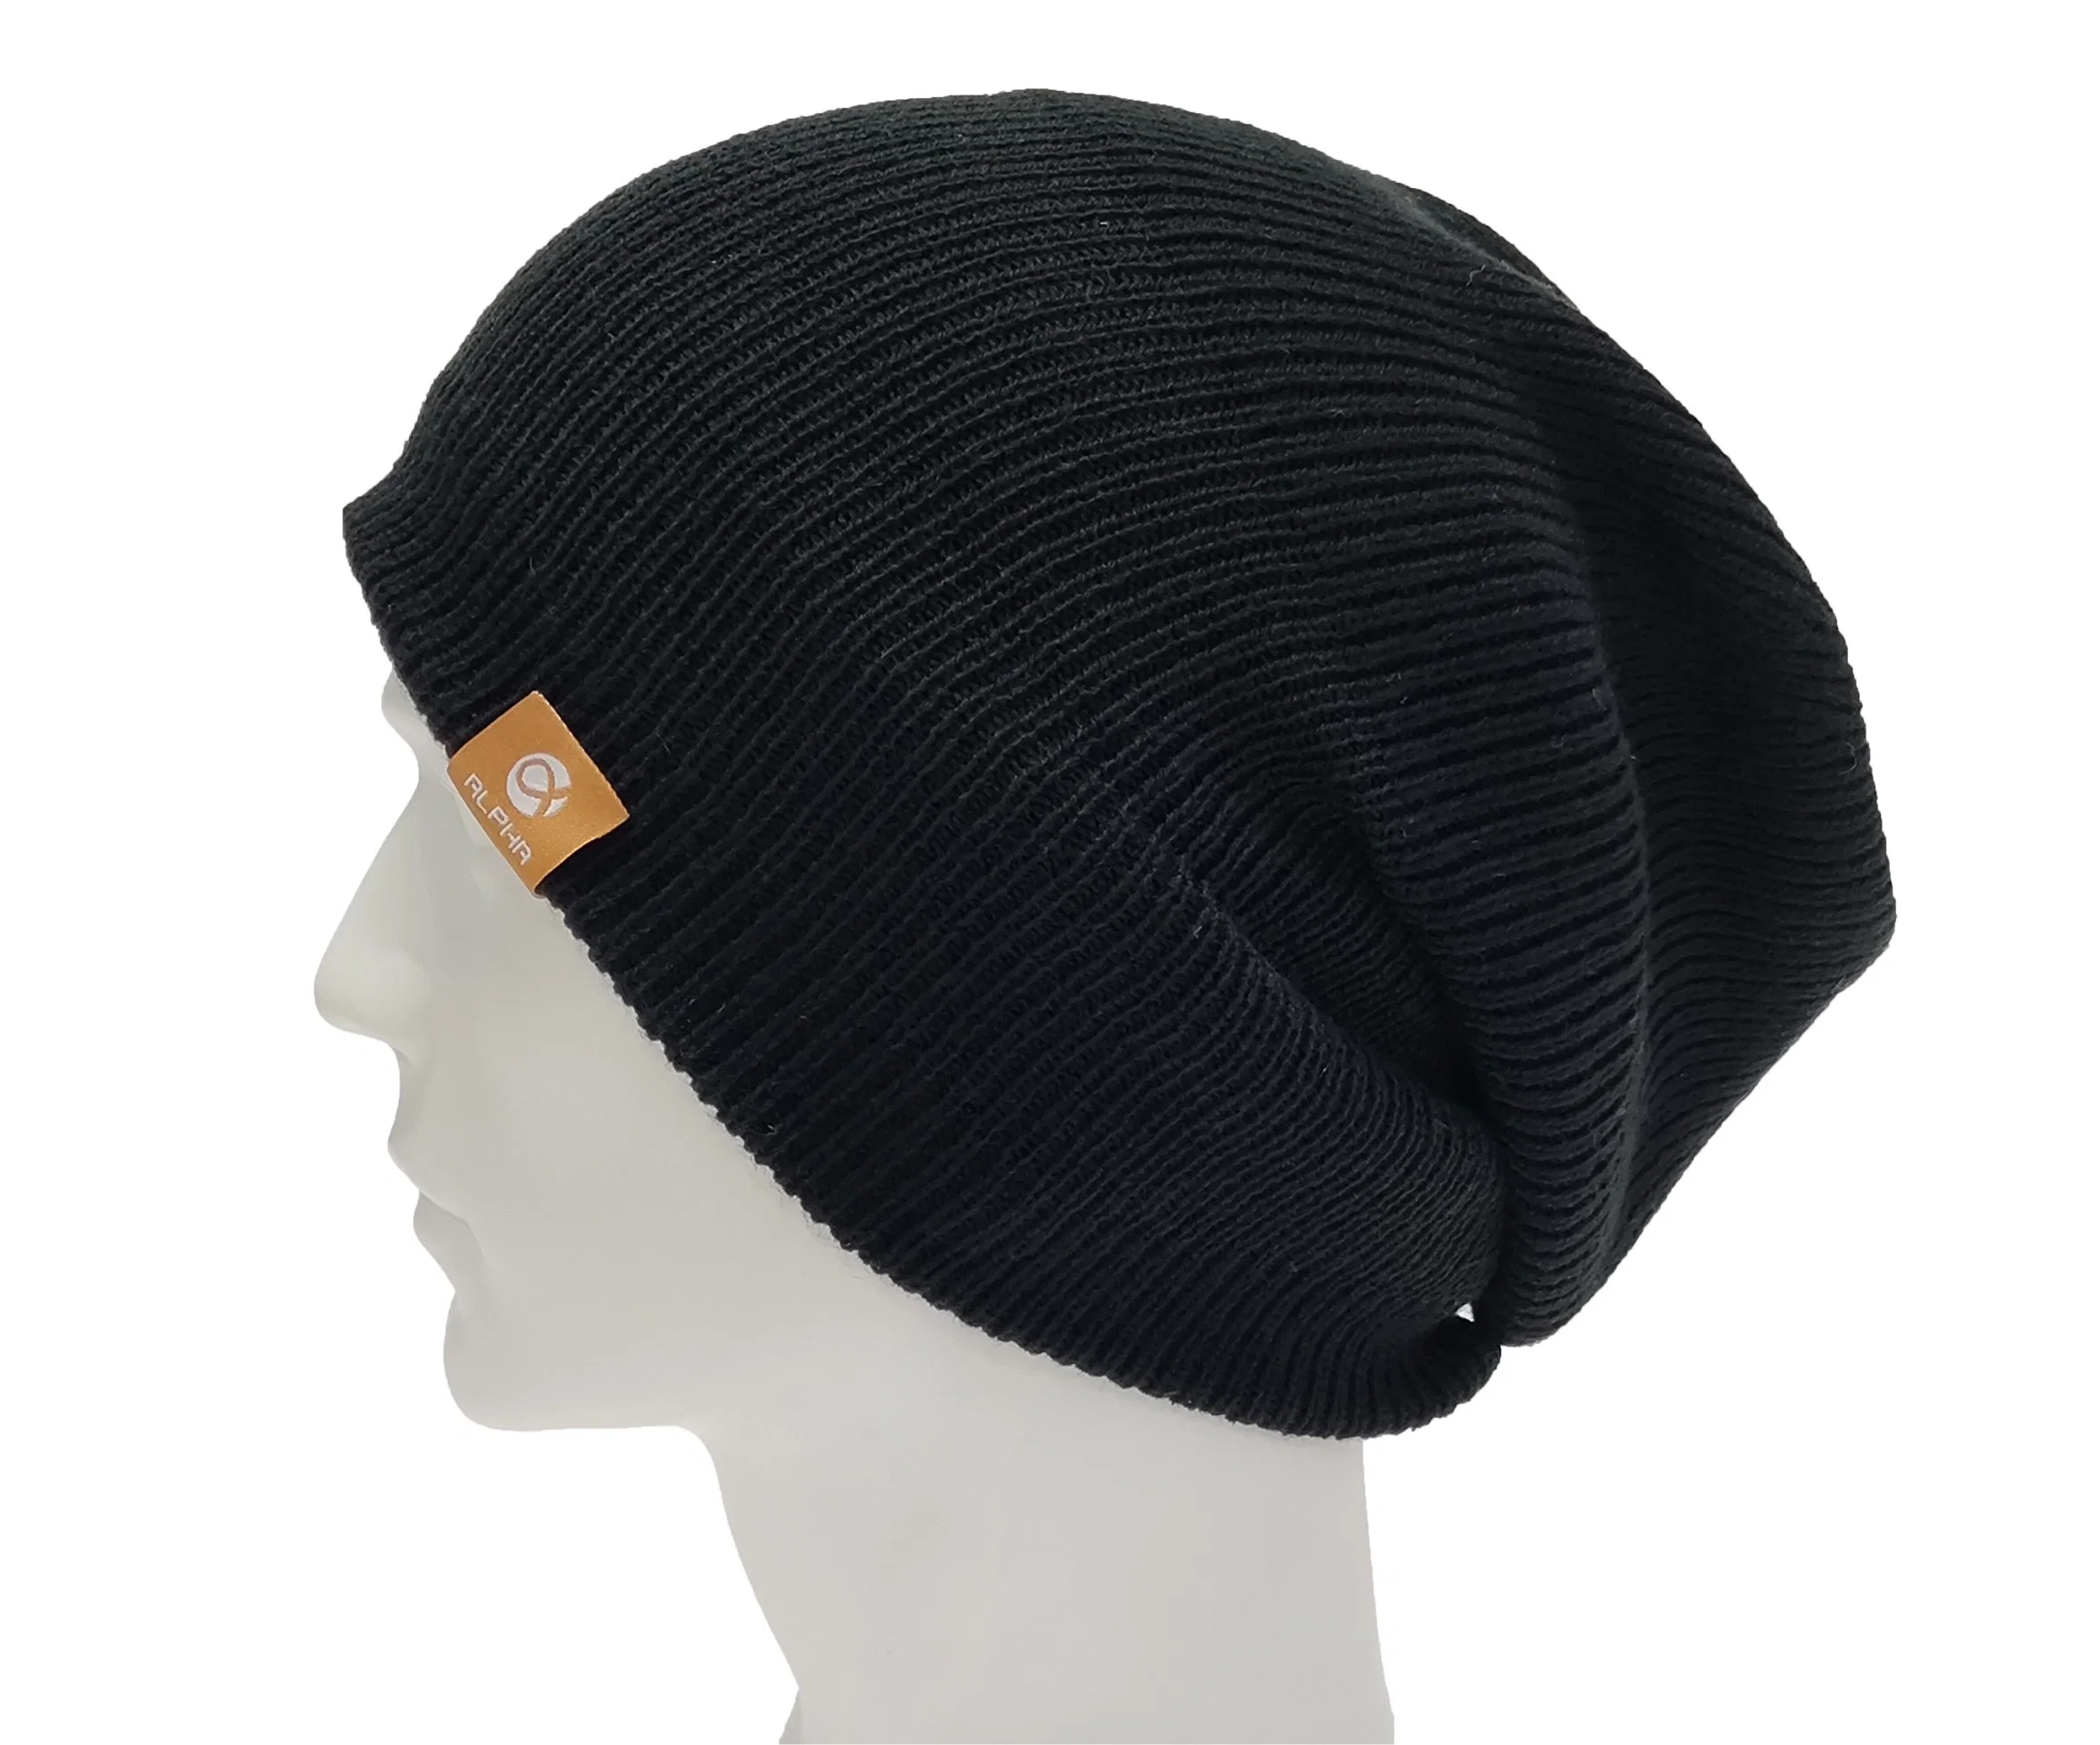 Winter Cuffed and Slouchy Beanie Knitted Hat with Woven Logo